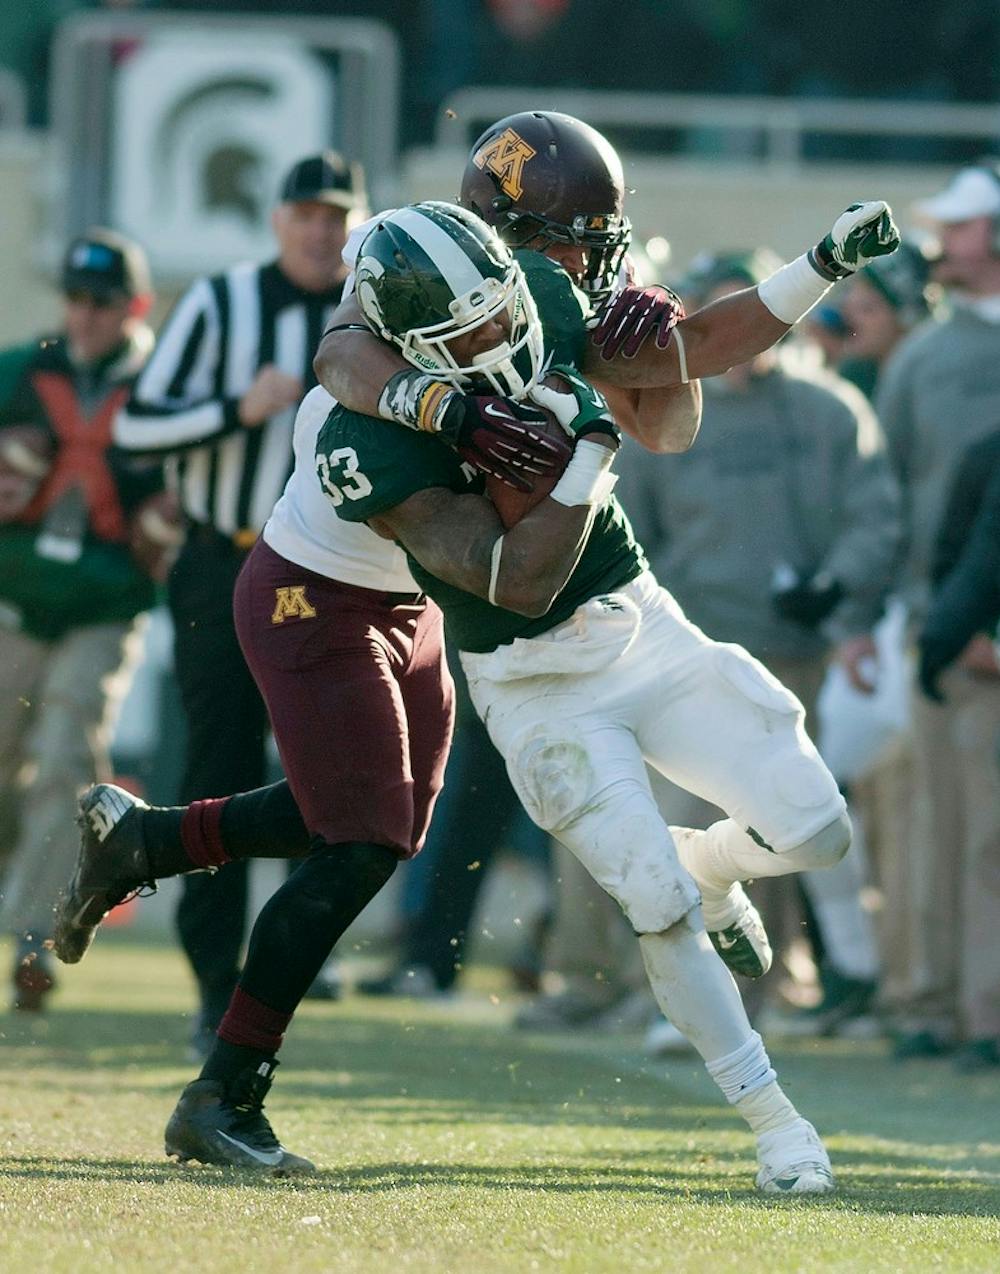 	<p>Minnesota linebacker Aaron Hill tackles junior running back Jeremy Langford on Nov. 30, 2013, at Spartan Stadium. The Spartans defeated the Golden Gophers, 14-3. Danyelle Morrow/The State News</p>